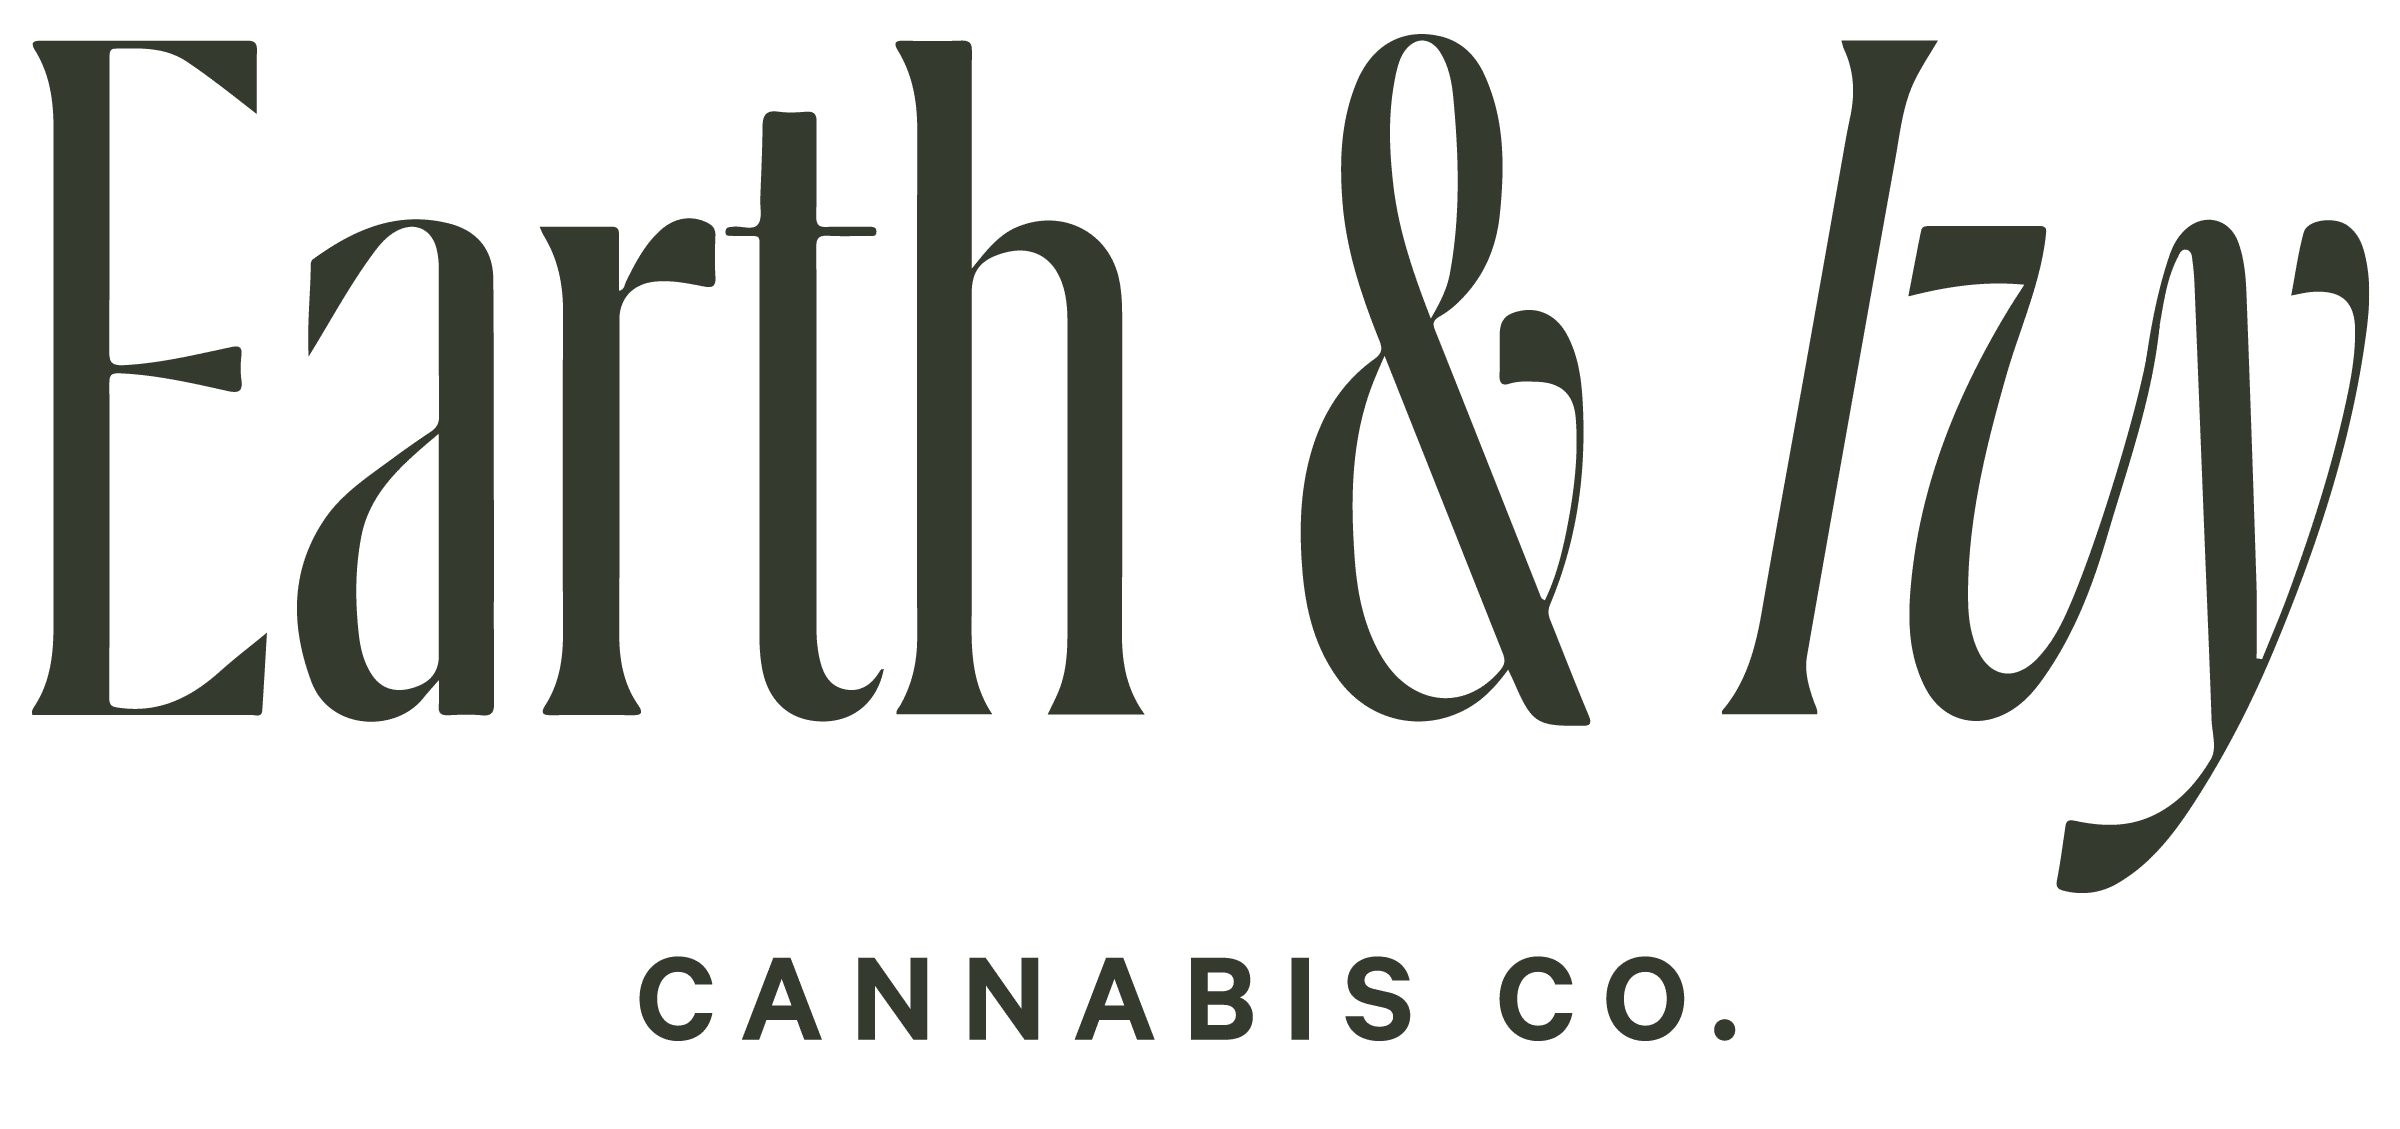 CARTRIDGE Archives - Earth & Ivy: New Jersey Recreational